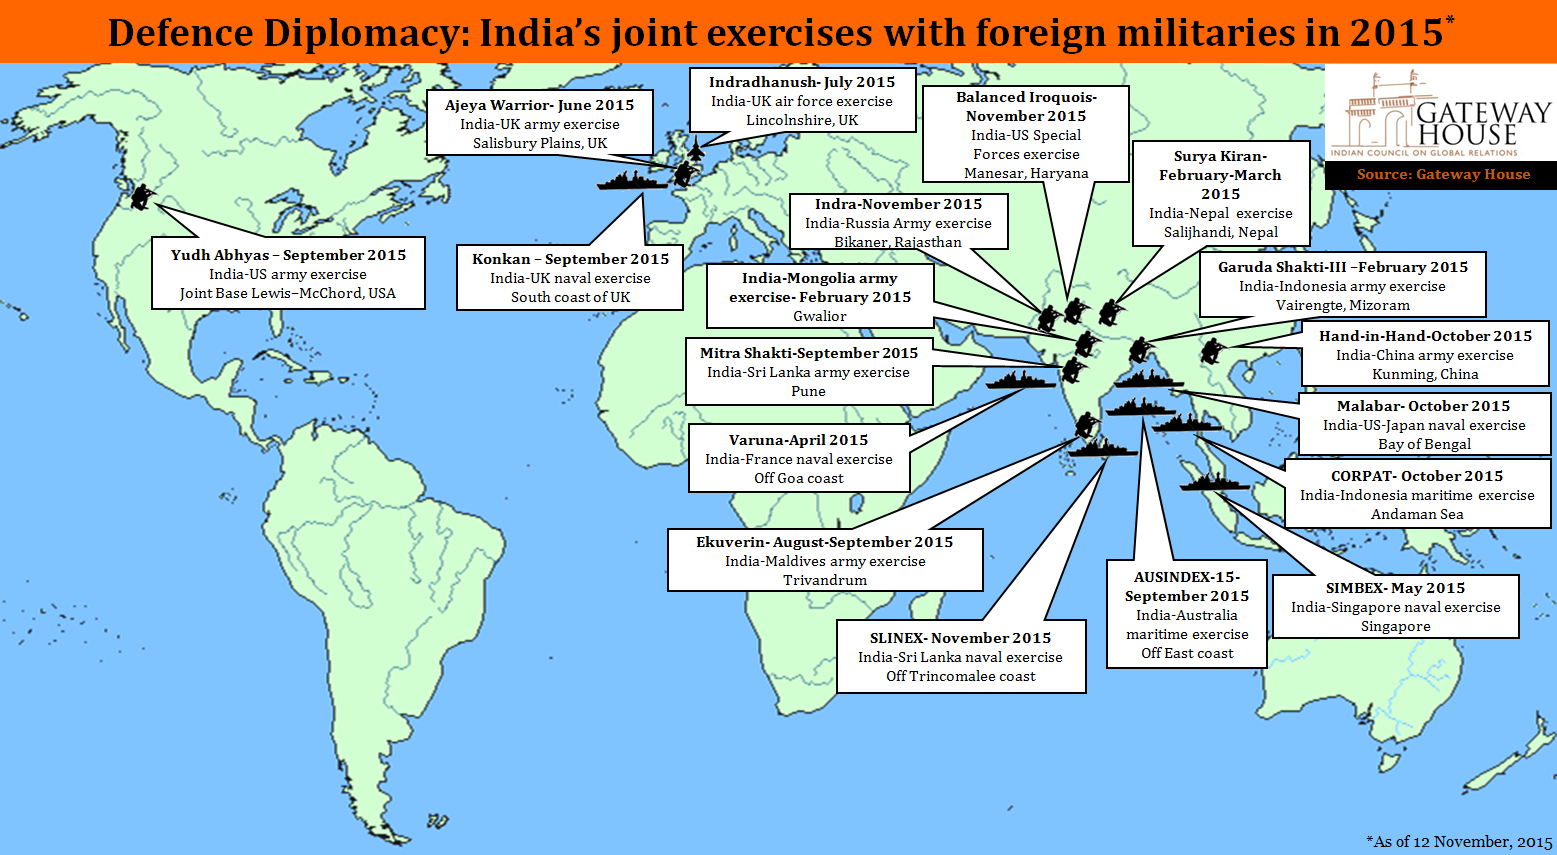 This year, India's defence diplomacy has ramped up. In 2015 alone there have been 18 military exercises- naval, army and air force- with 13 countries, among the largest engagements the country has had. Most significant is Japan joining the Malabar exercises in the Bay of Bengal and the first-ever maritime exercise with Australia. This is increasing India's presence from the Arabian Sea to the Bay of Bengal. As these exercises intensify India will be better positioned to handle regional security challenges.